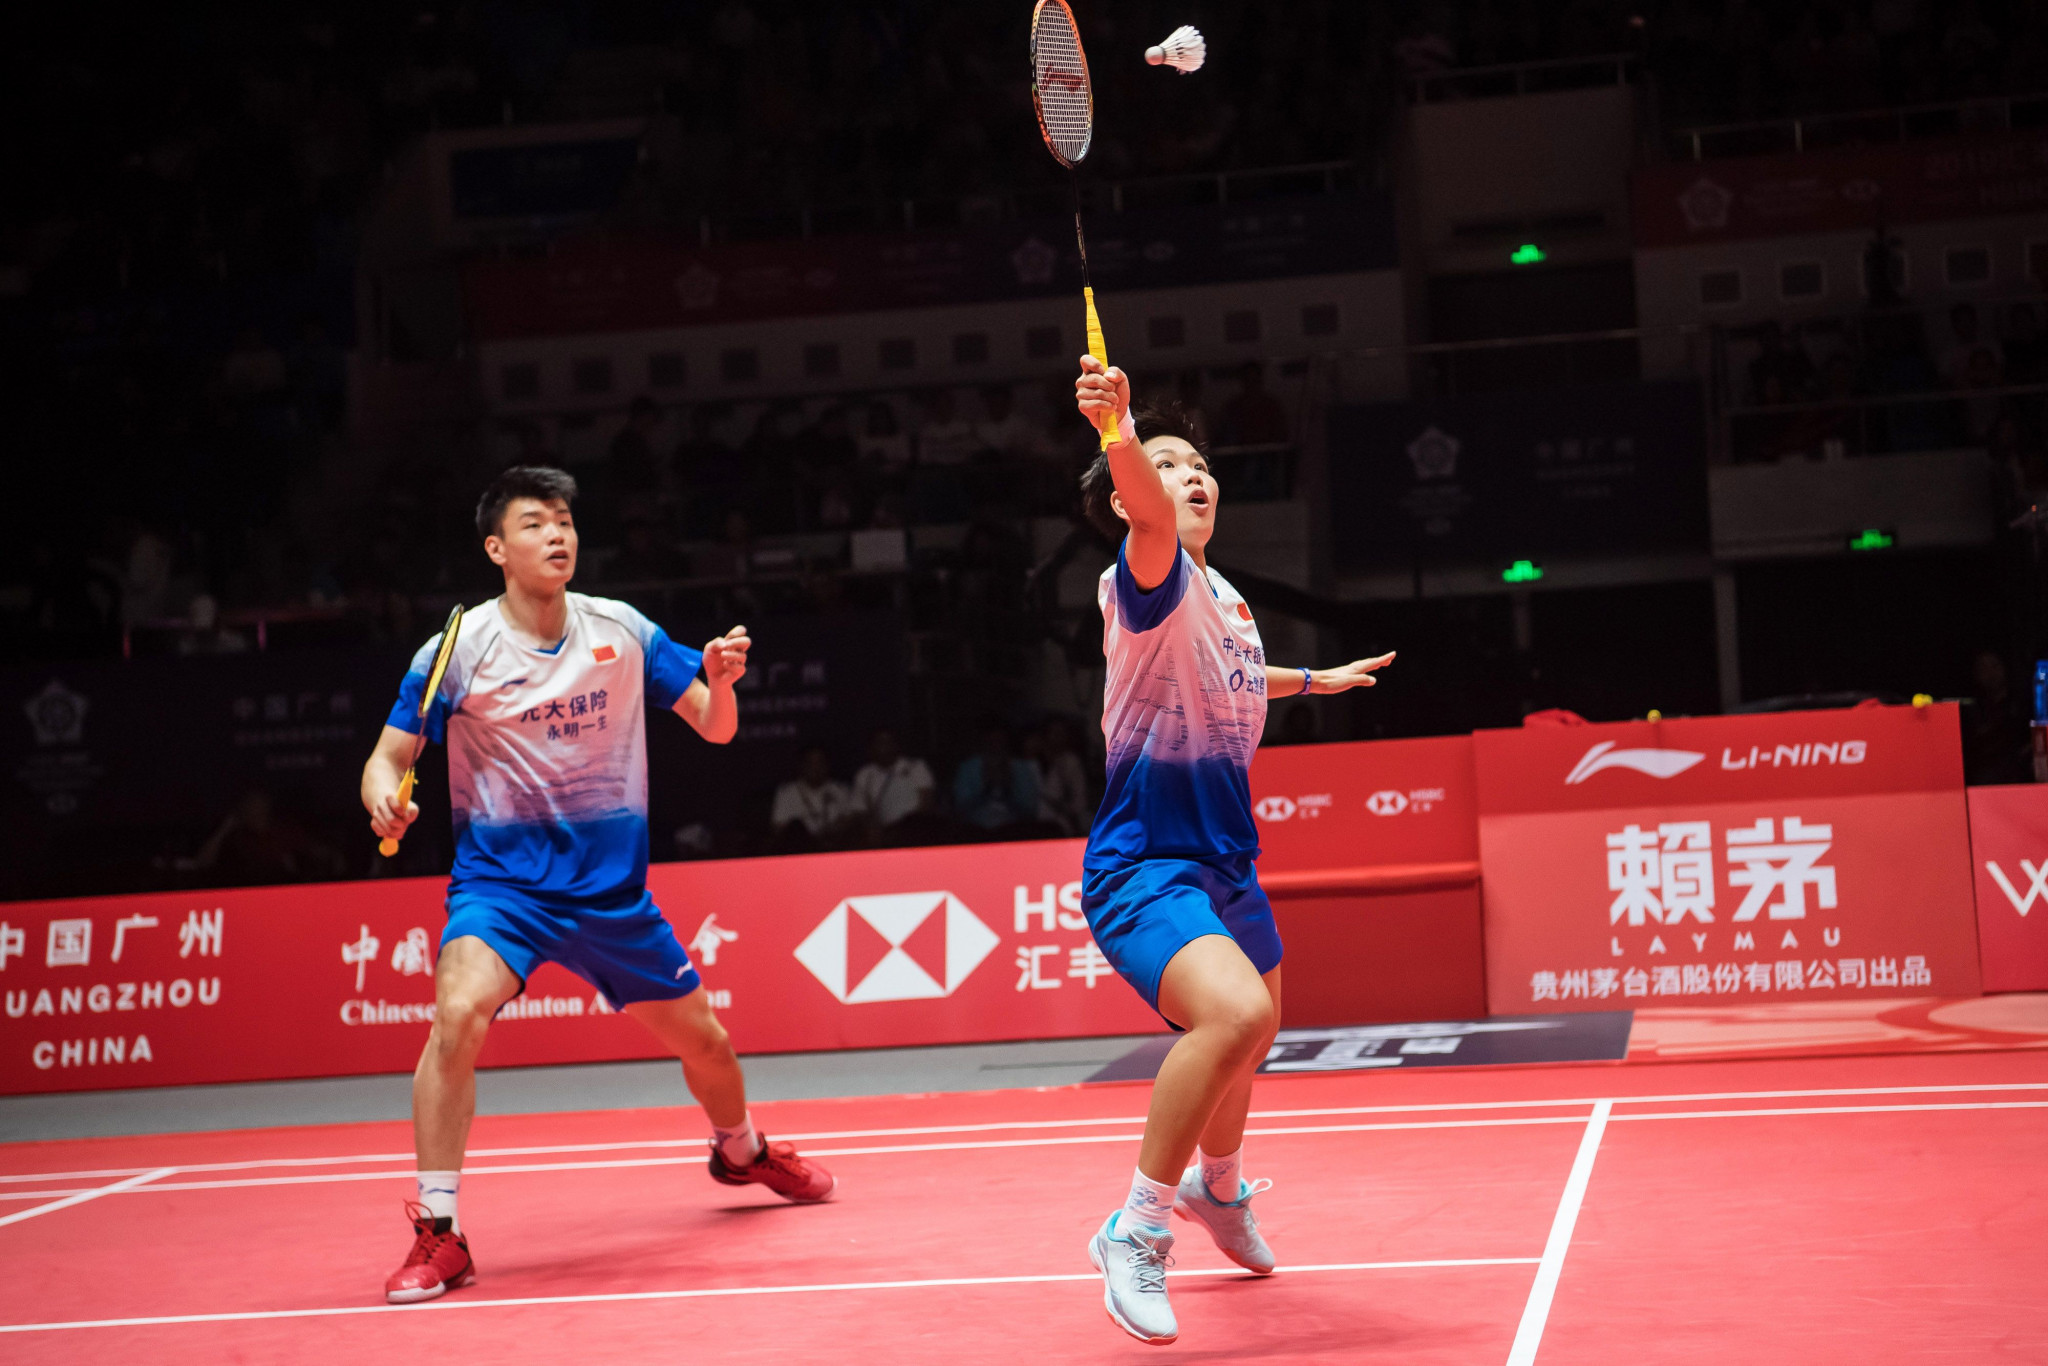 The BWF World Tour Finals are still planned but the venue is now unconfirmed  ©Getty Images